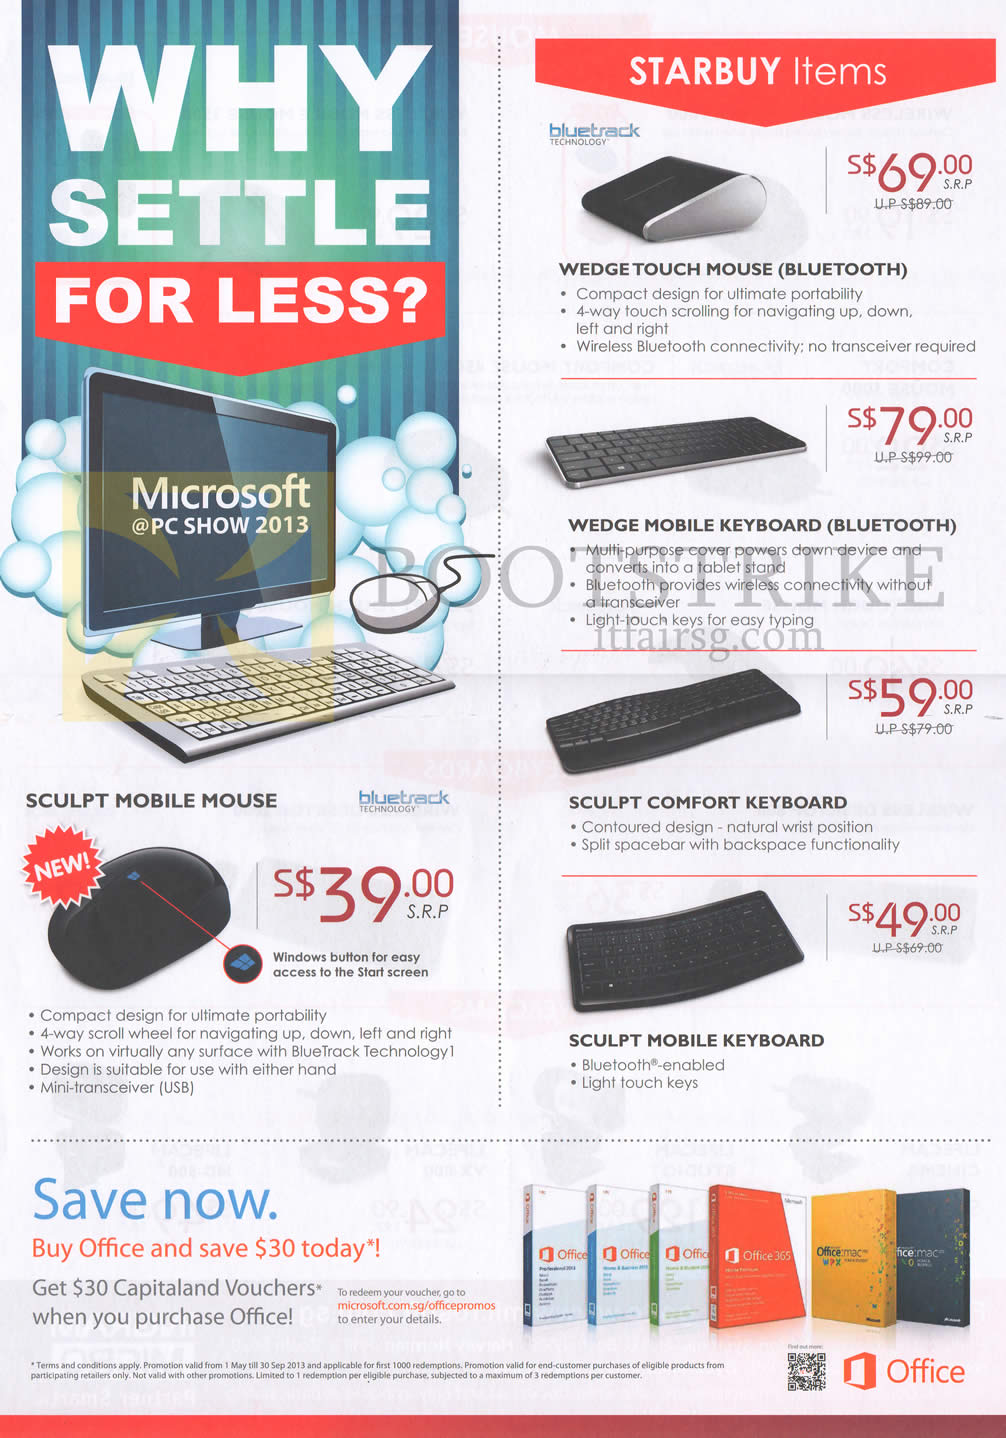 PC SHOW 2013 price list image brochure of Microsoft Mouse Wedge Touch, Keyboard Bluetooth, Sculpt Comfort, Mobile Mouse, Keyboard, Office 365 Software